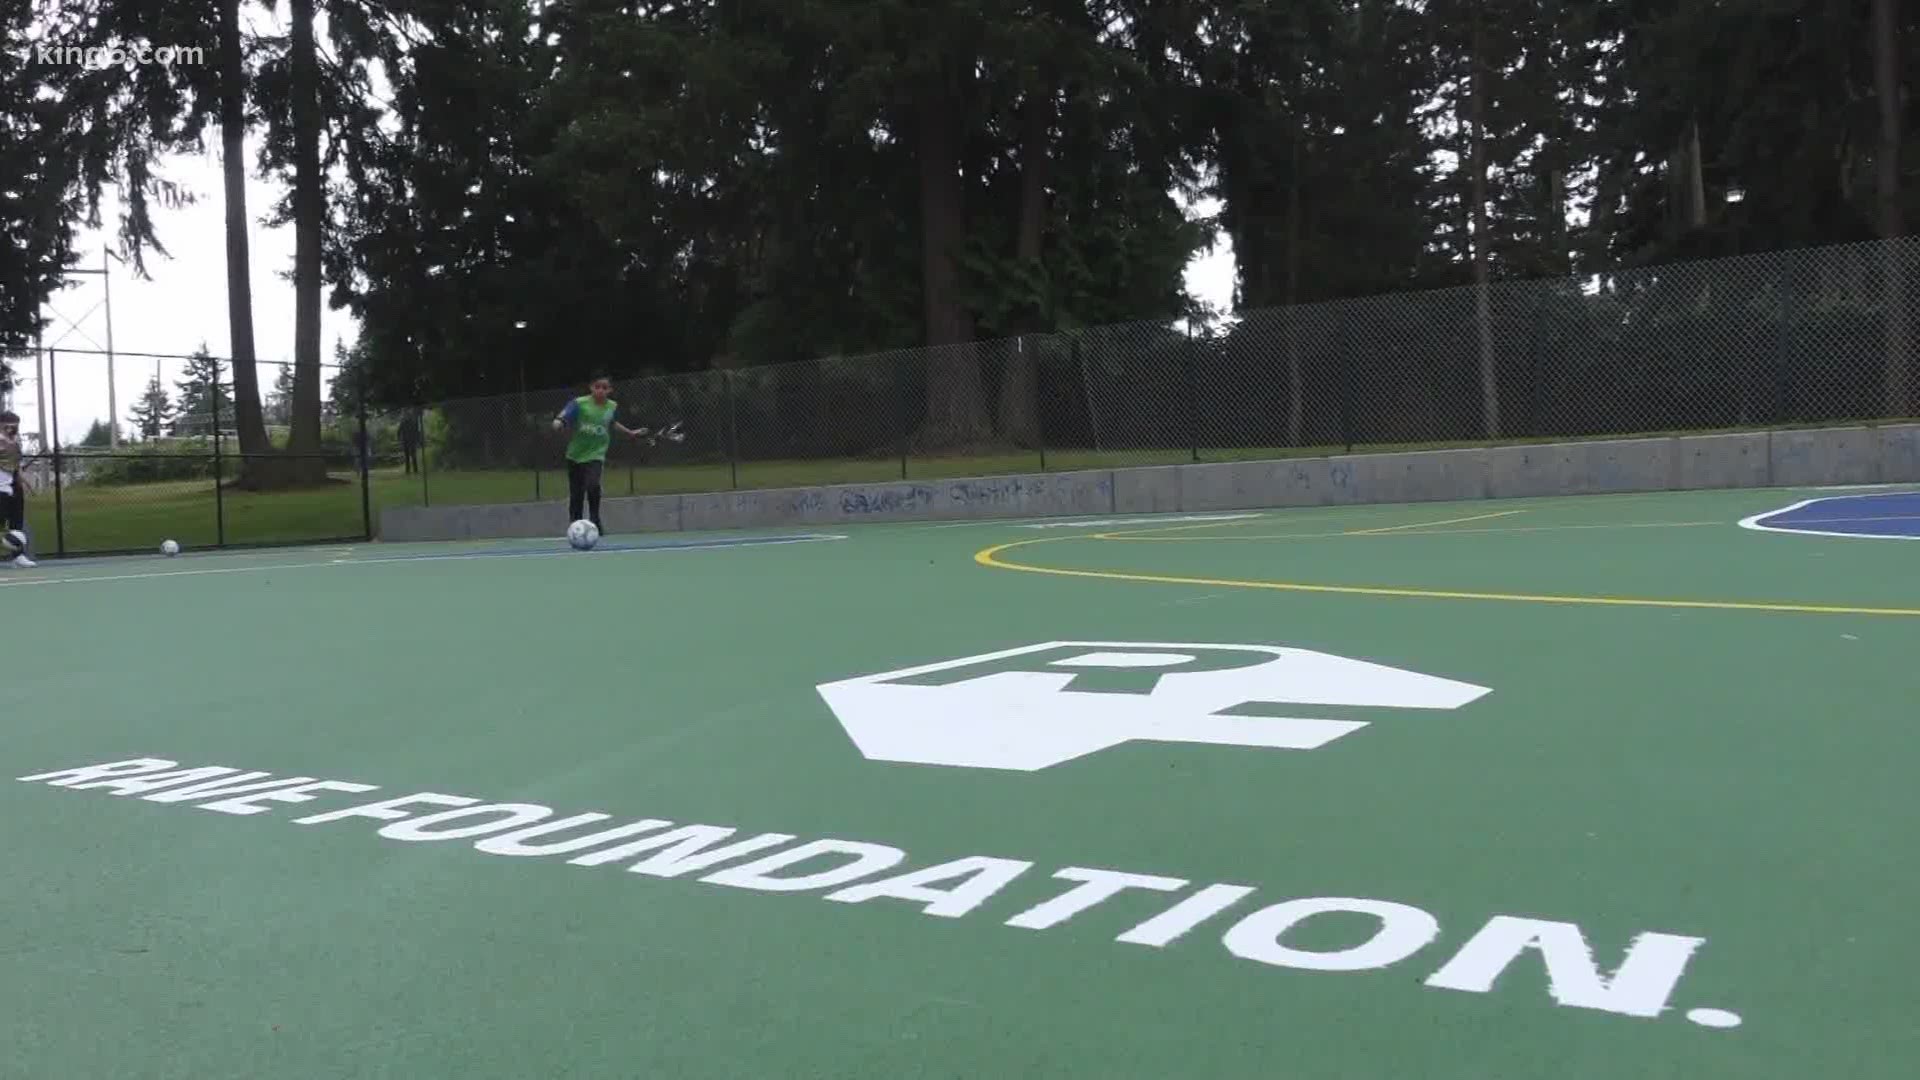 Some of Seattle's most successful sports franchises are teaming up to create a custom space for local kids to celebrate summer. KING 5's Chris Cashman has the story.